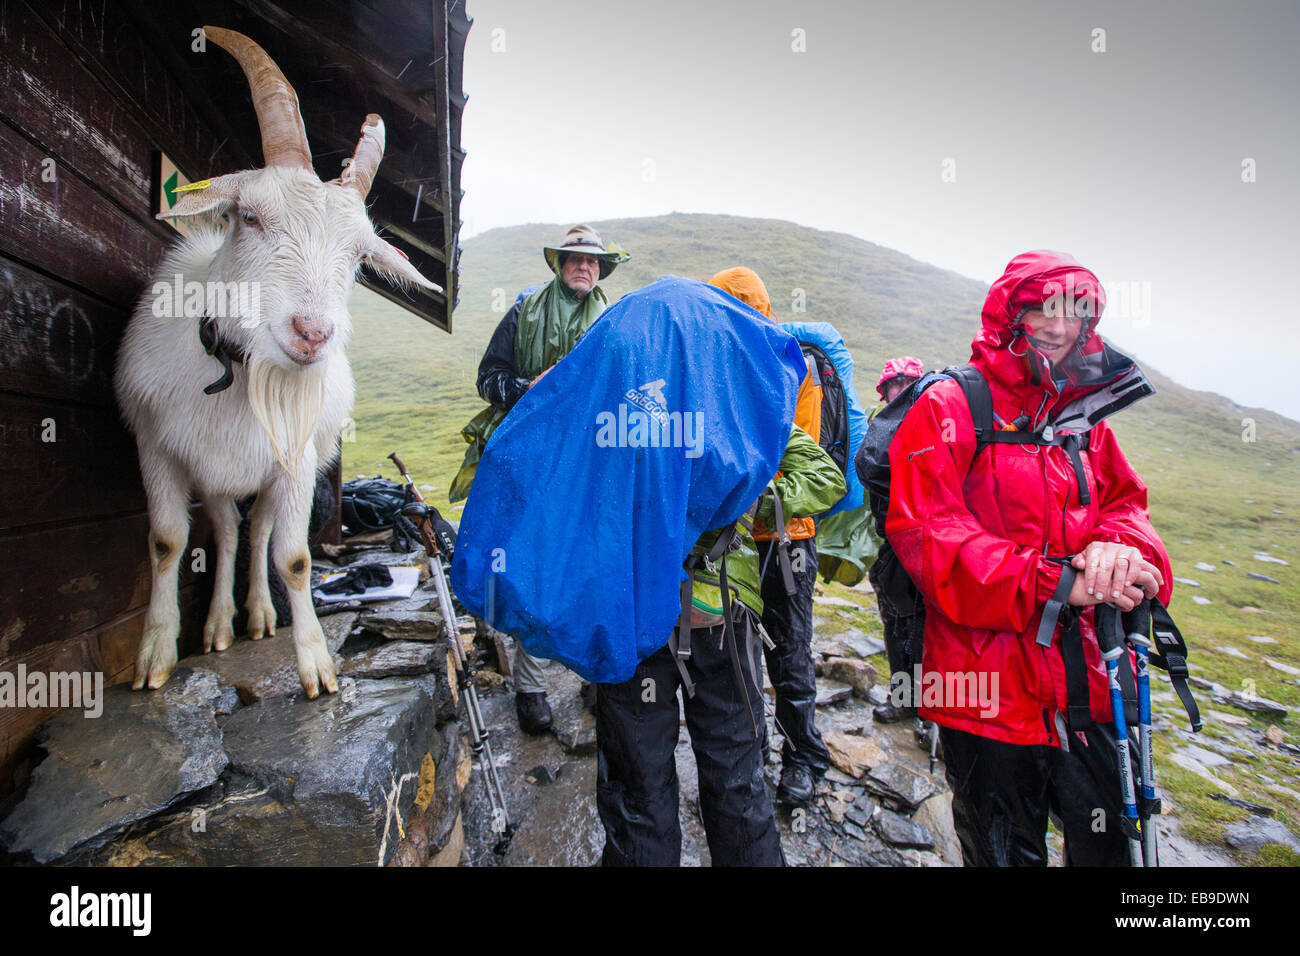 Walkers on the Tour Du Mont Blanc share shelter from heavy rain with a goat on the Col Du Bonhomme near Les Contamines, French Alps. Stock Photo